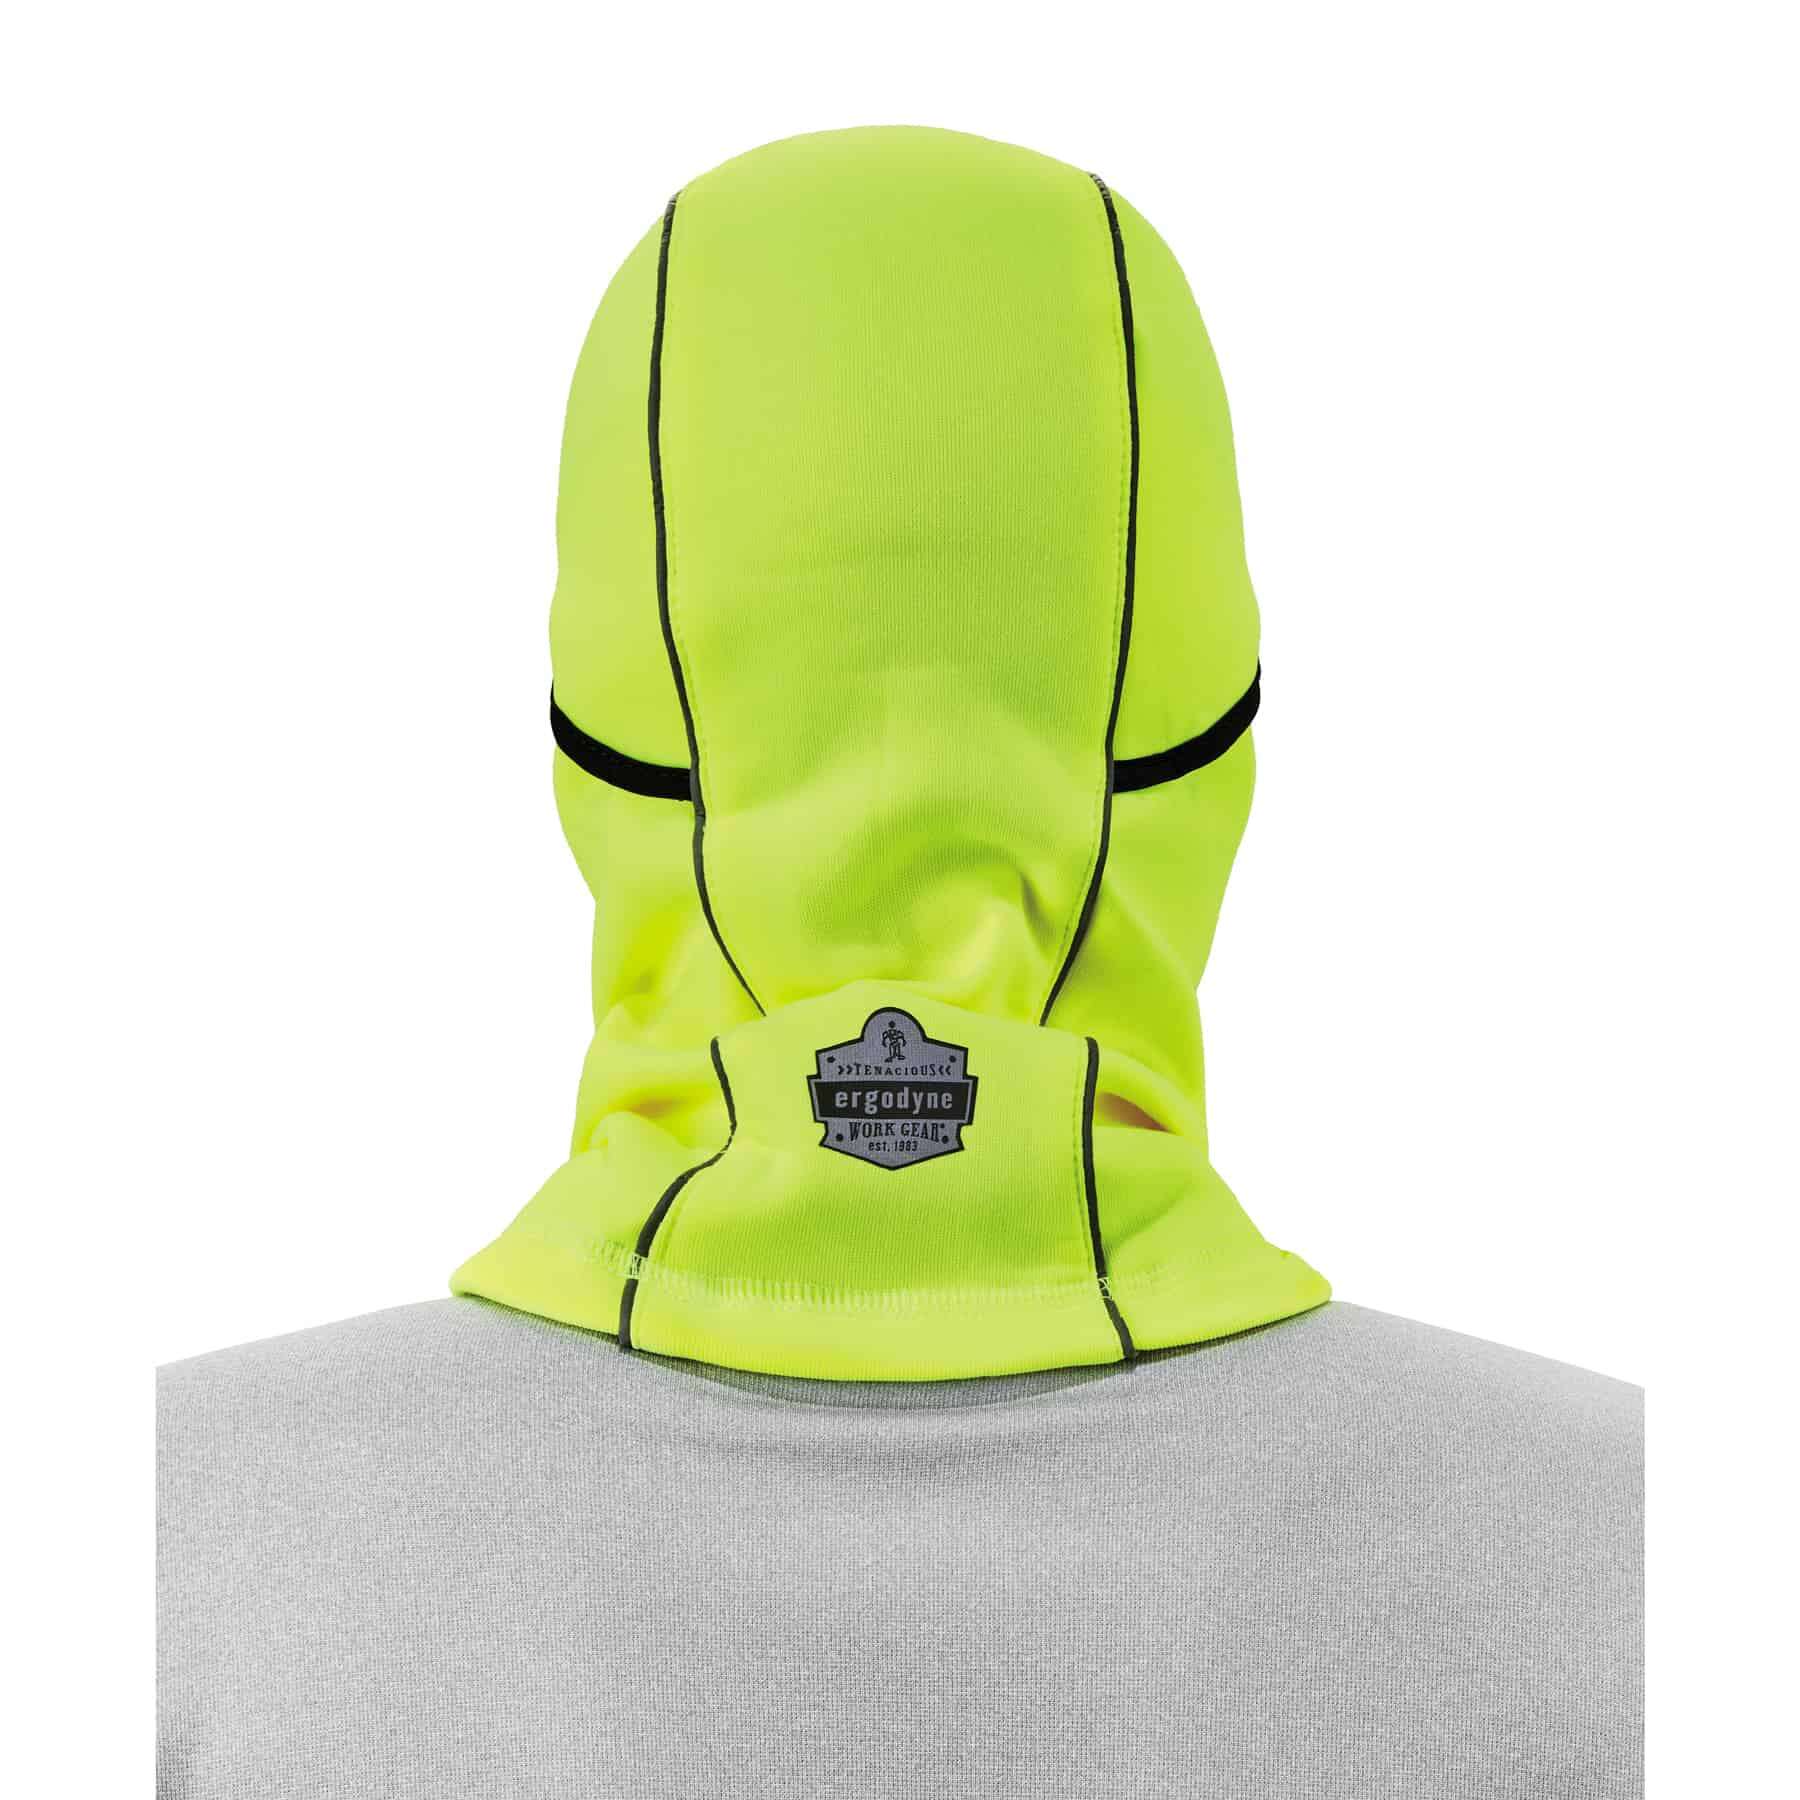 Wind-proof Hinged Balaclava Face Mask - Warming Devices